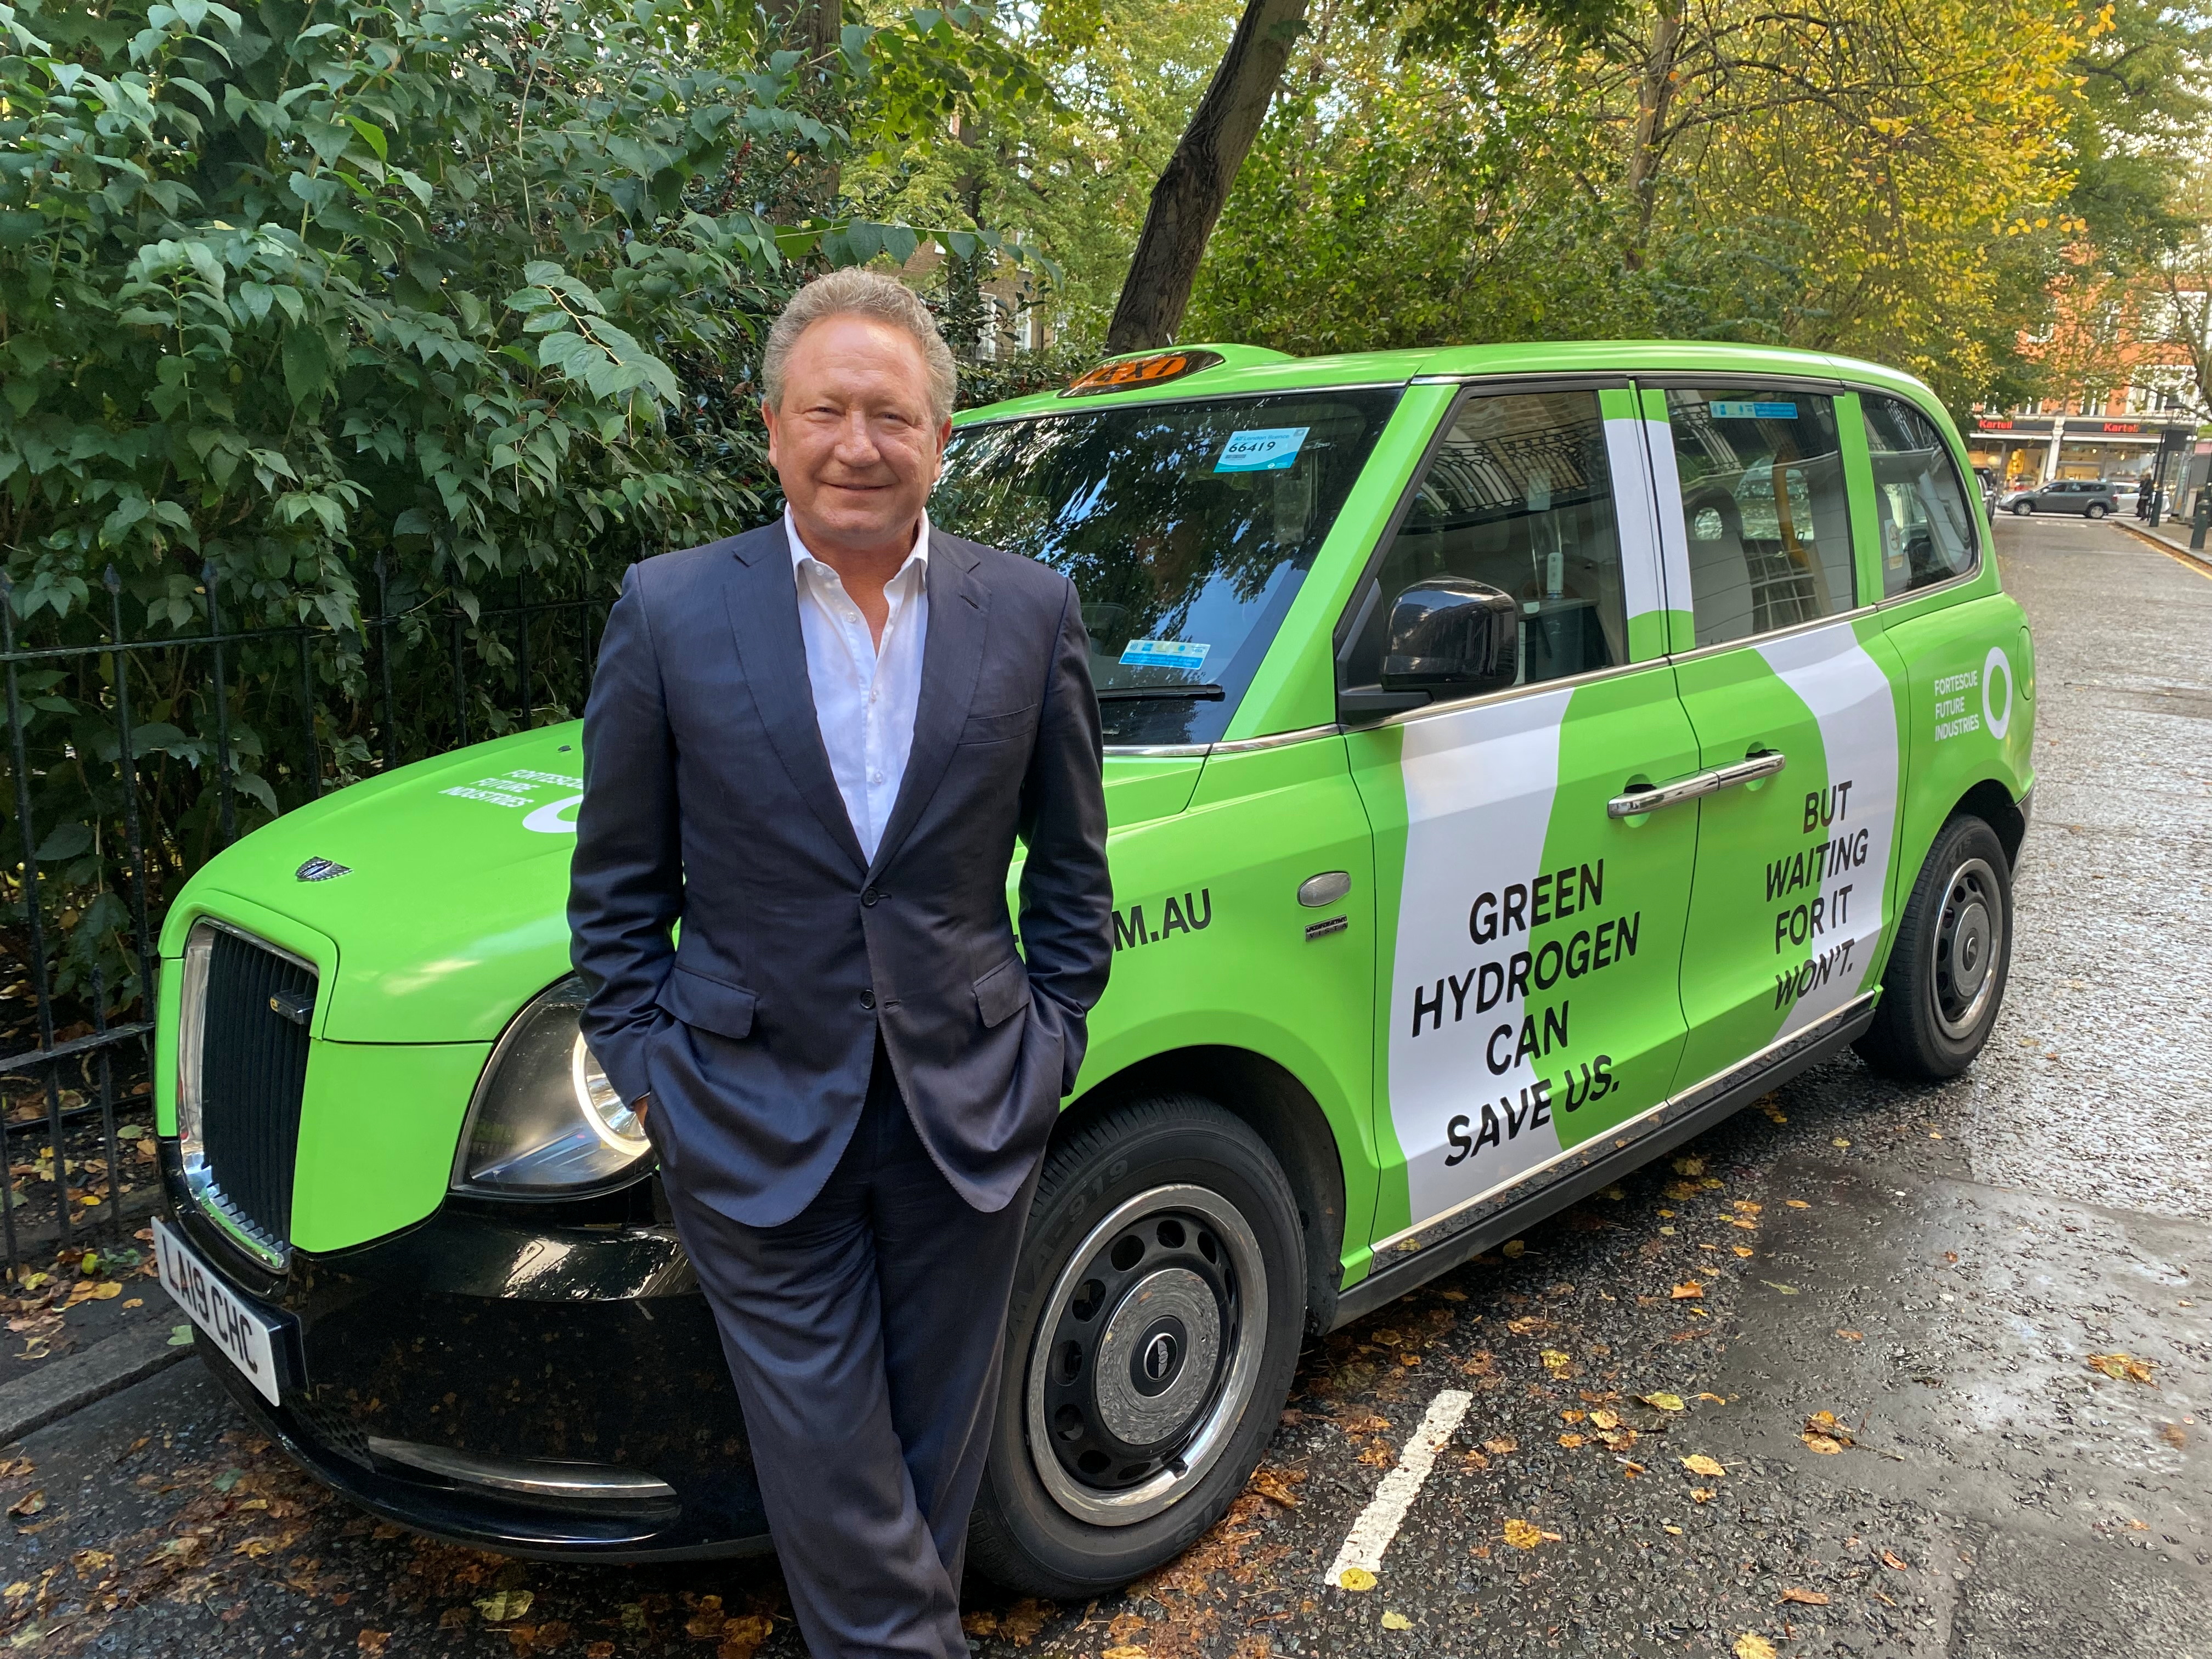 Andrew Forrest, Australian billionaire and Chief Executive Officer of Fortescue Metals Group do not undermine the drive for clean energy alternatives such as green hydrogen in London